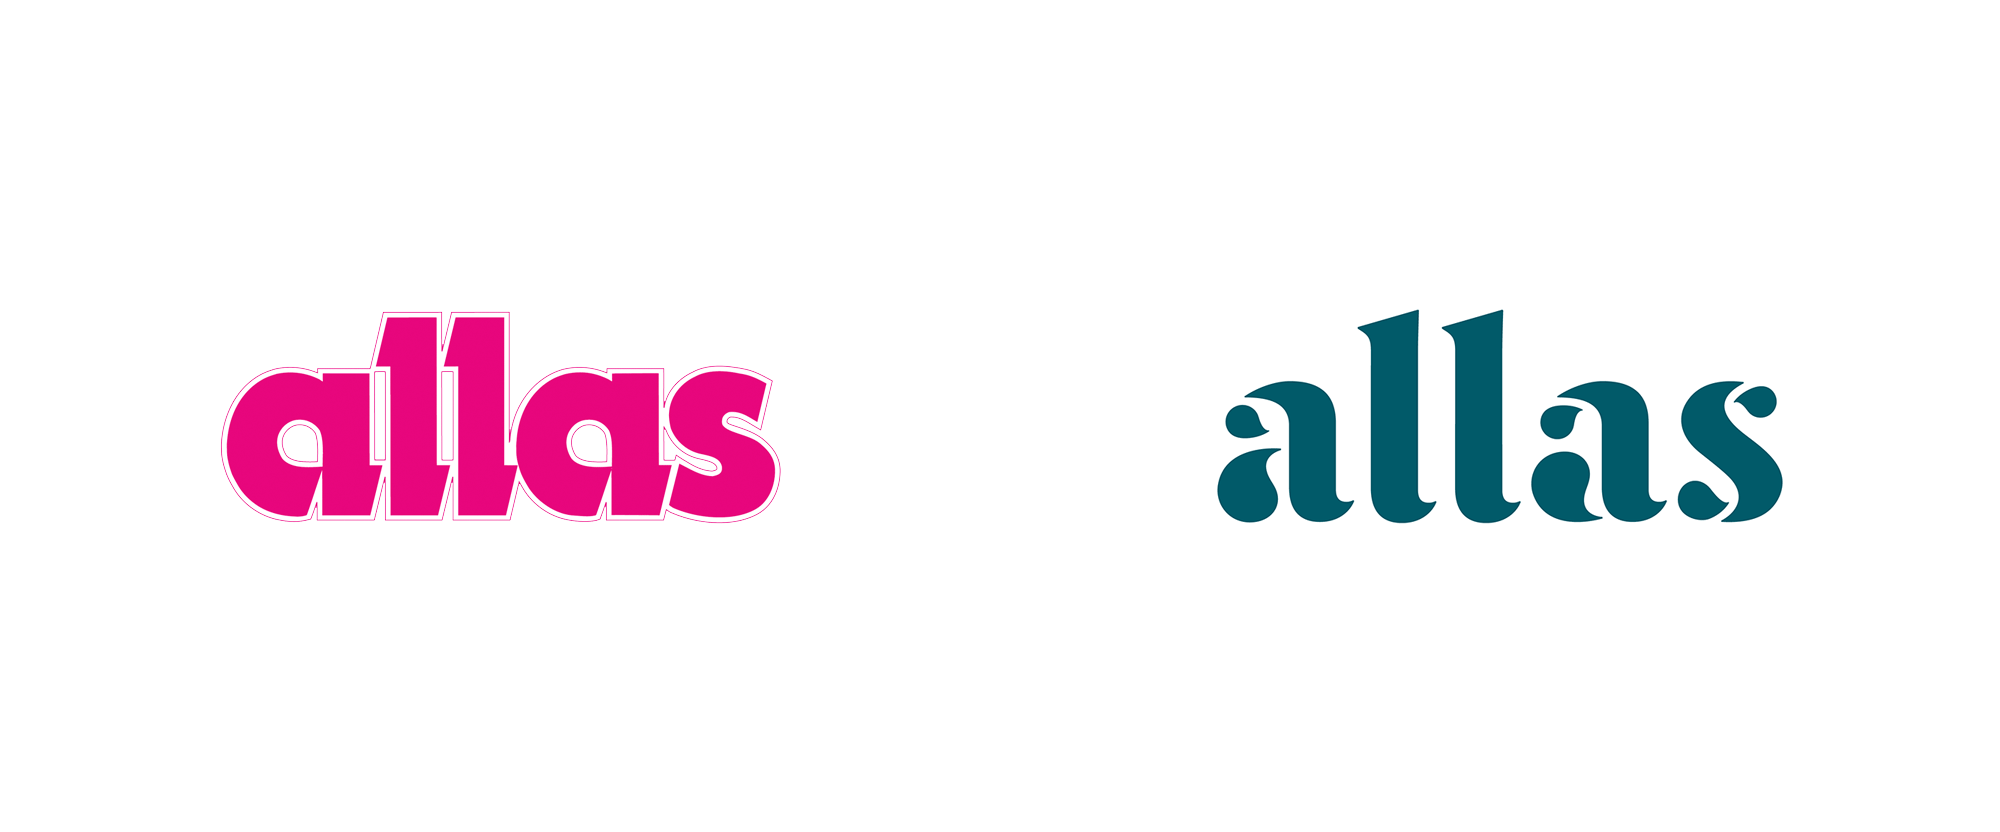 New Logo and Identity for Allas by Bedow